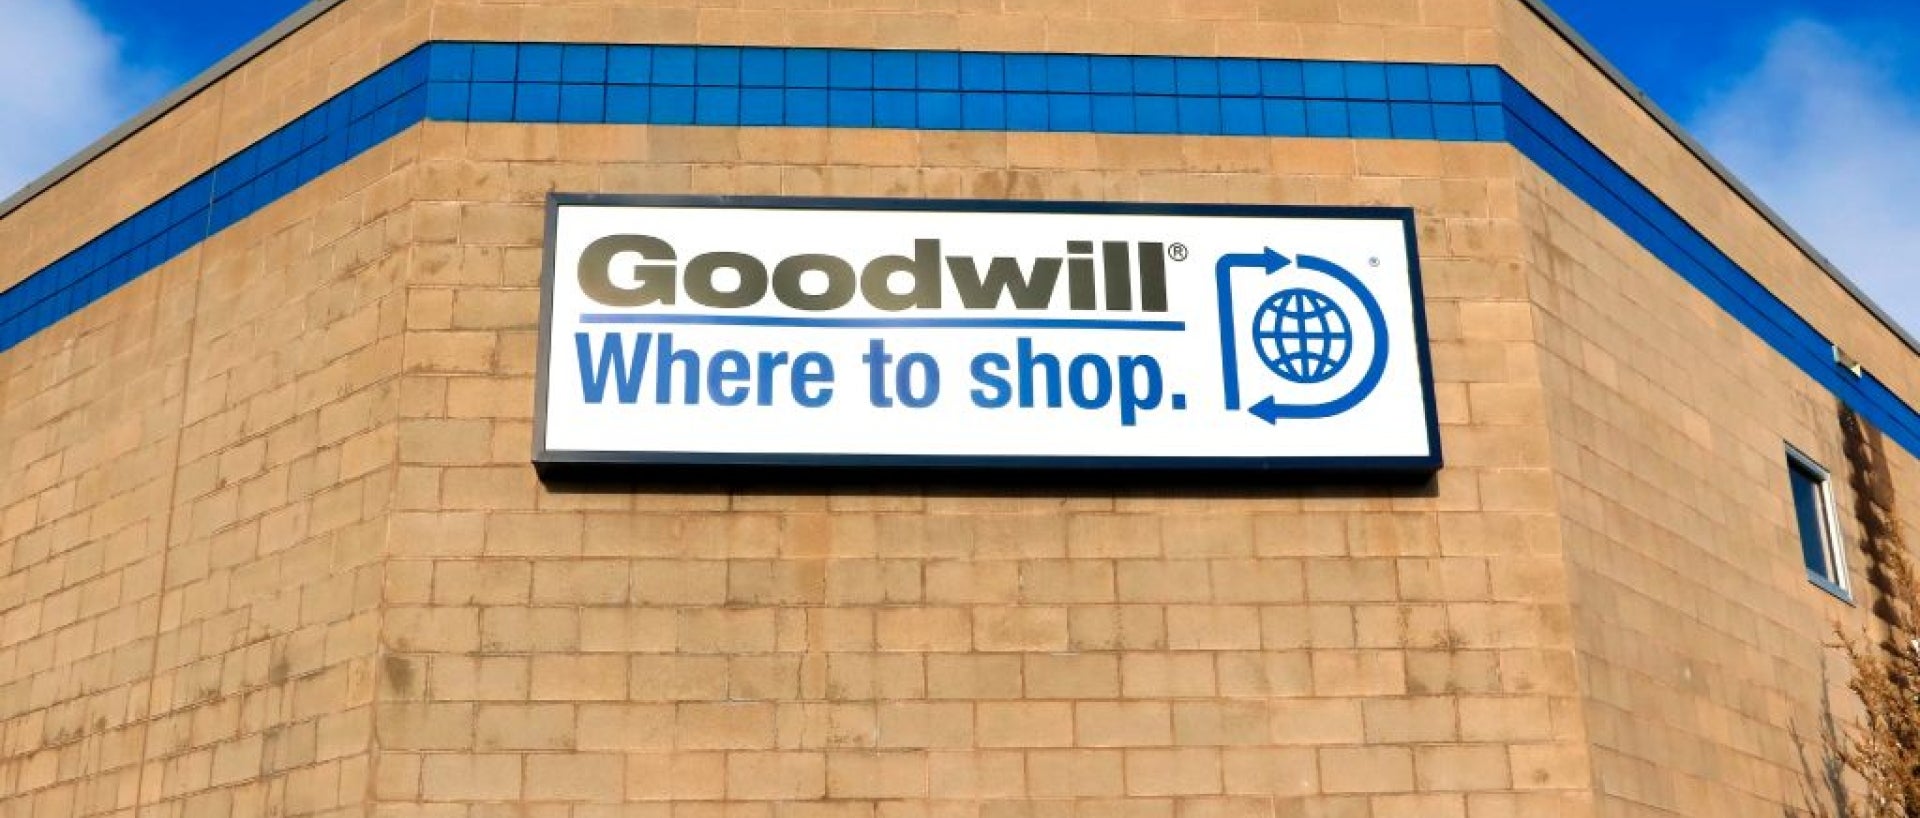 Goodwill storefront sign